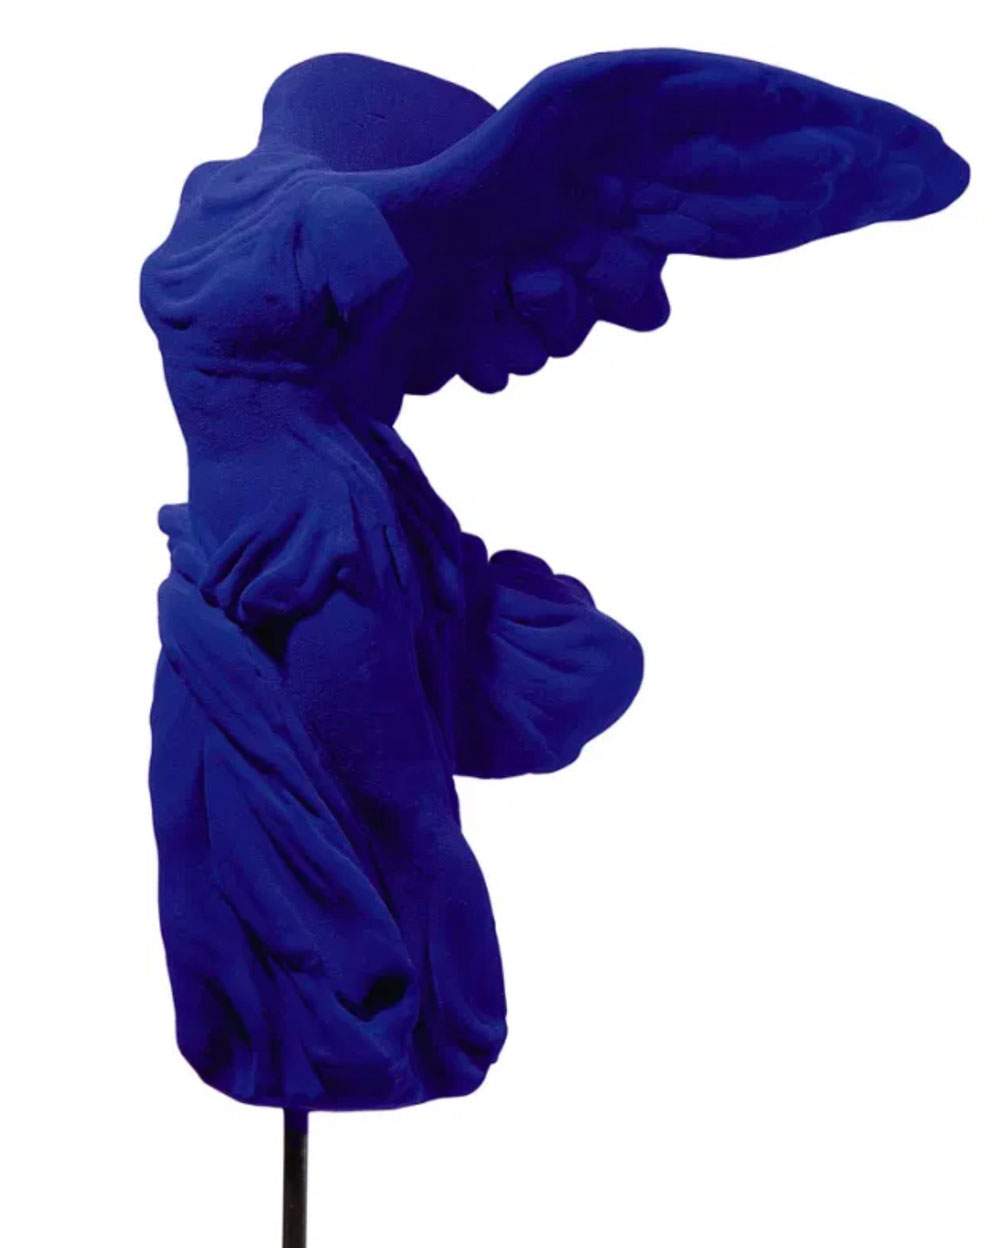 Genoa, five exhibitions linked by Blue. From jeans to Yves Klein